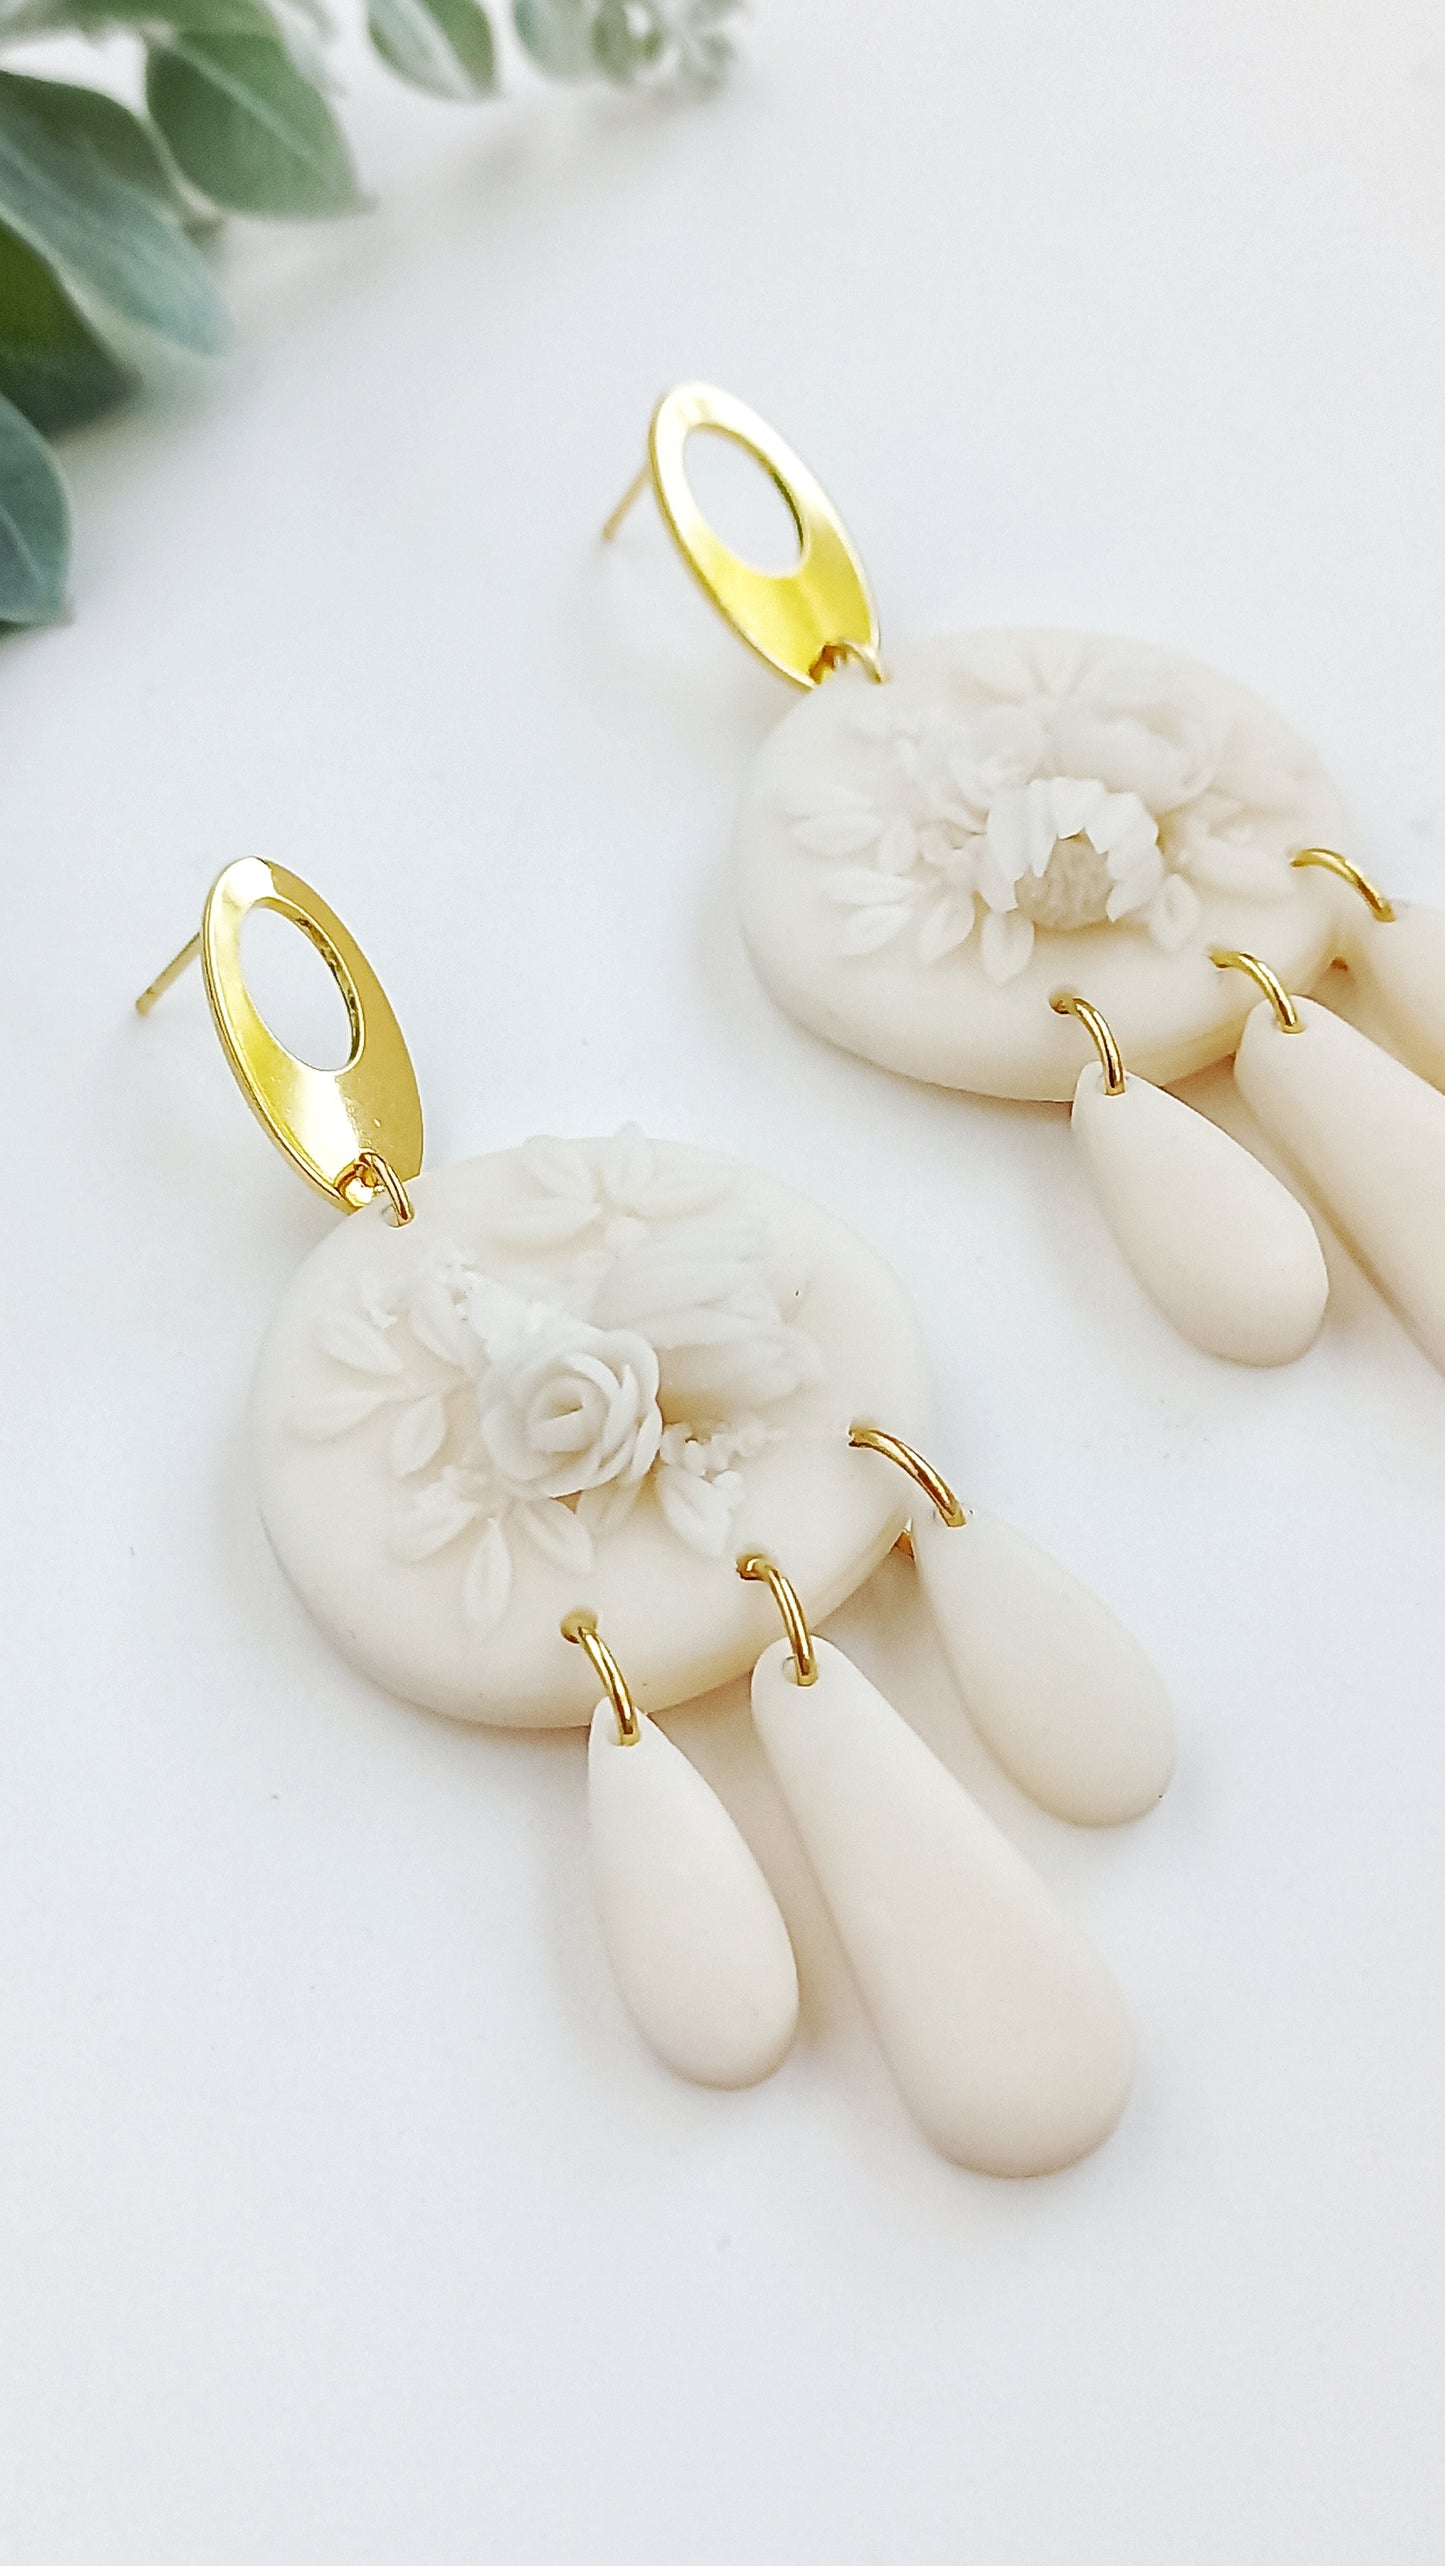 Chaska Protea - Medium Cricle earring with gold stainless steel oval